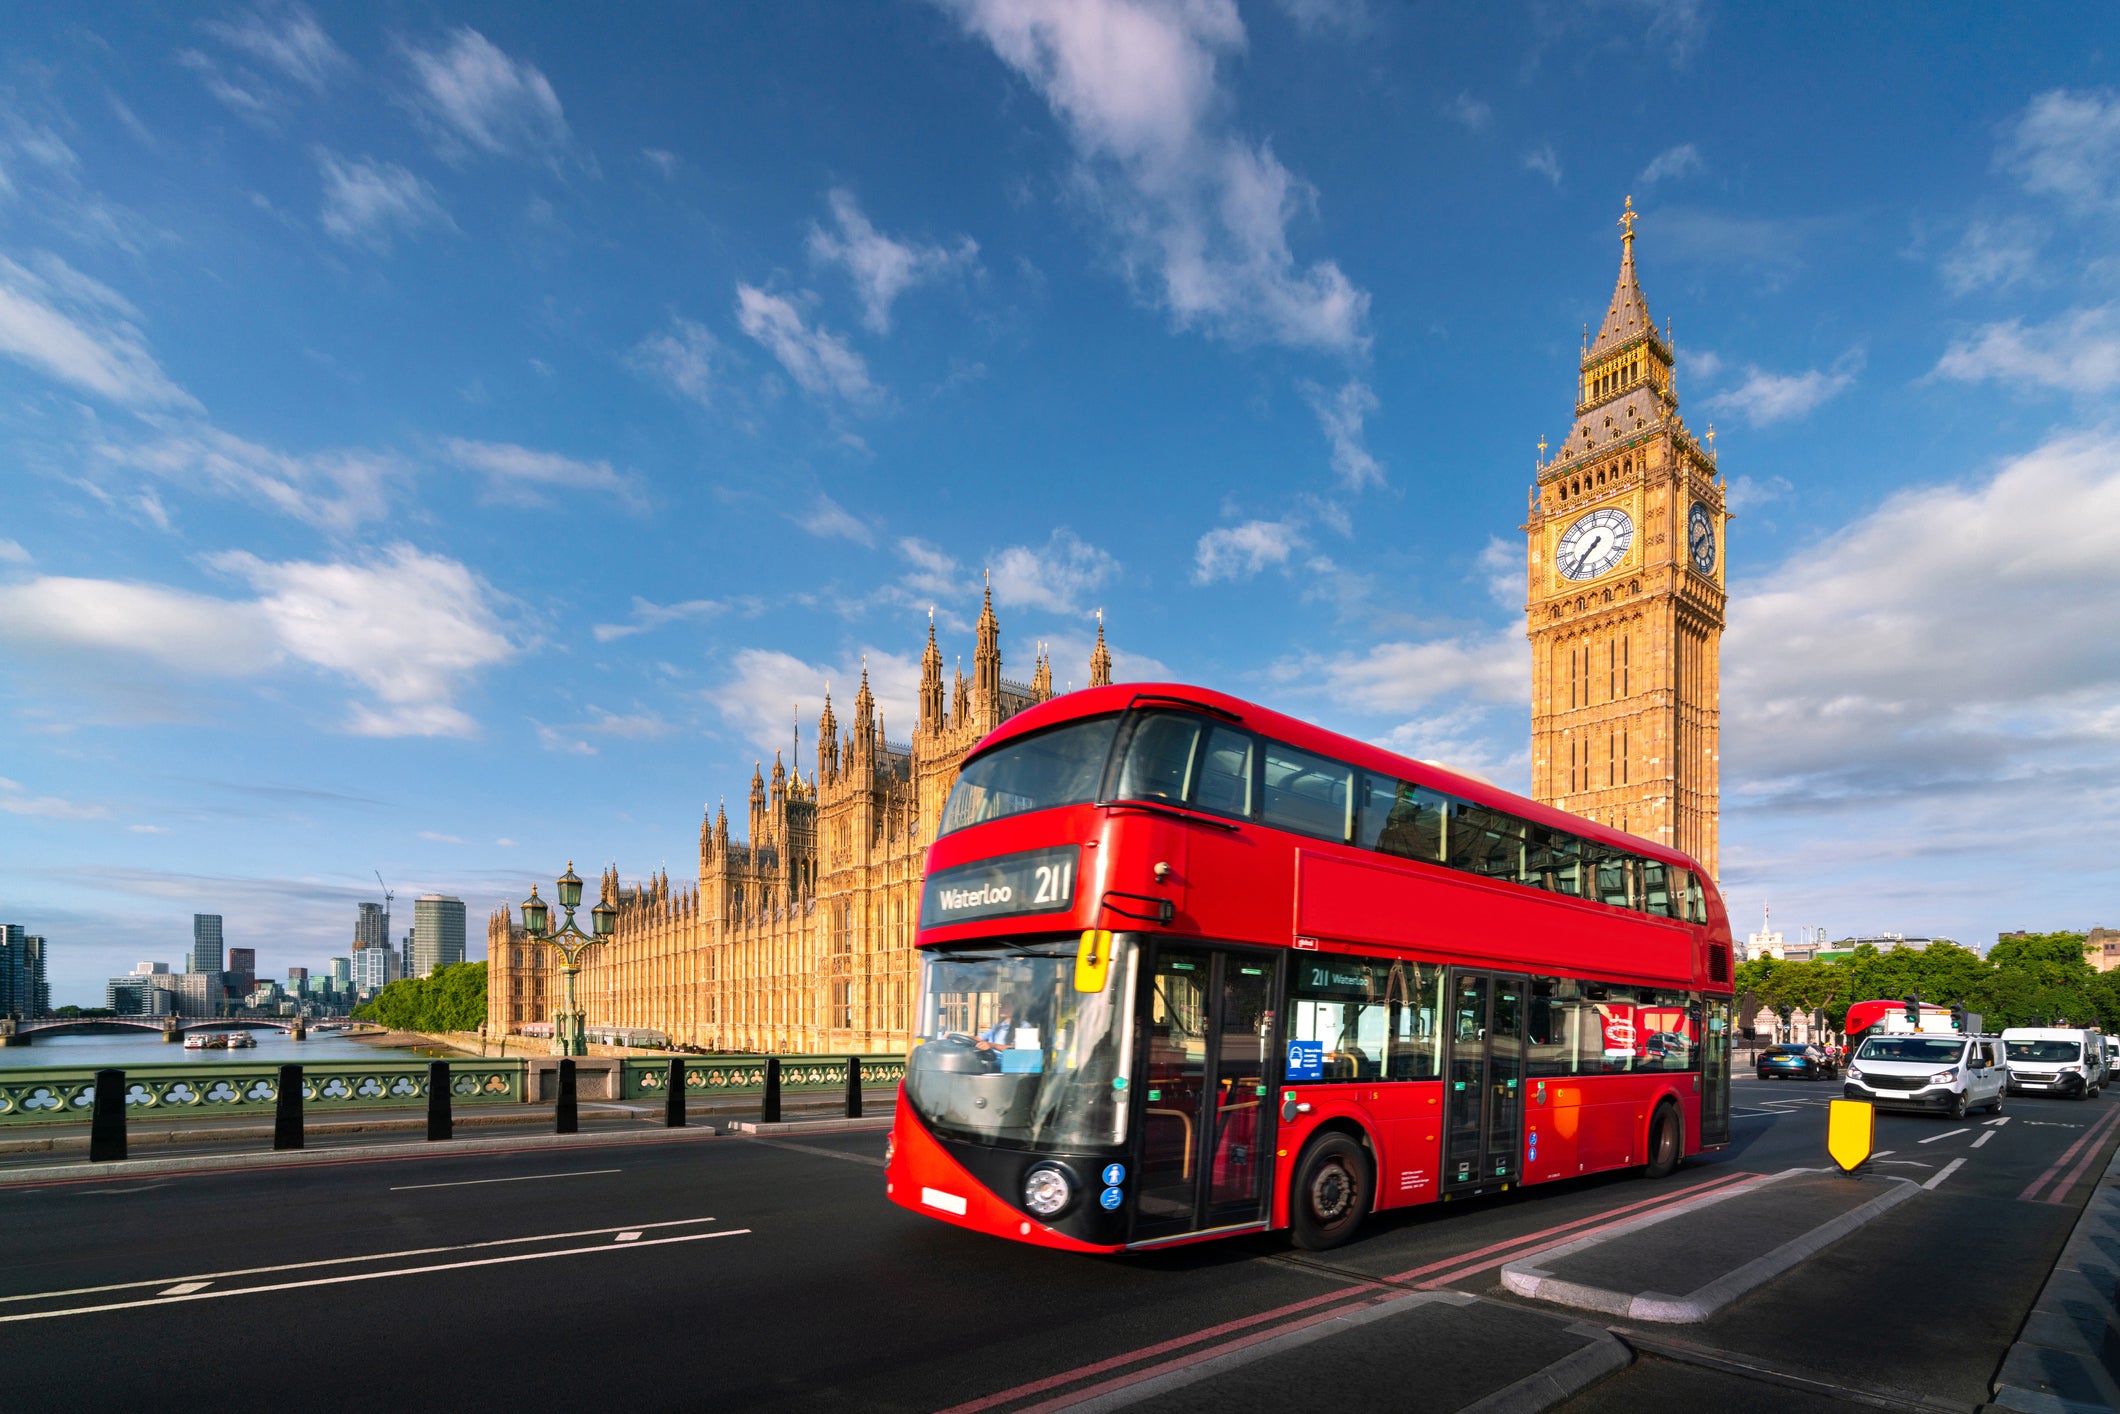 Palace of Westminster with Big Ben tower clock or Elizabeth bell and red big bus for passenger public transportation in London, Great Britain, England of United Kingdom, UK